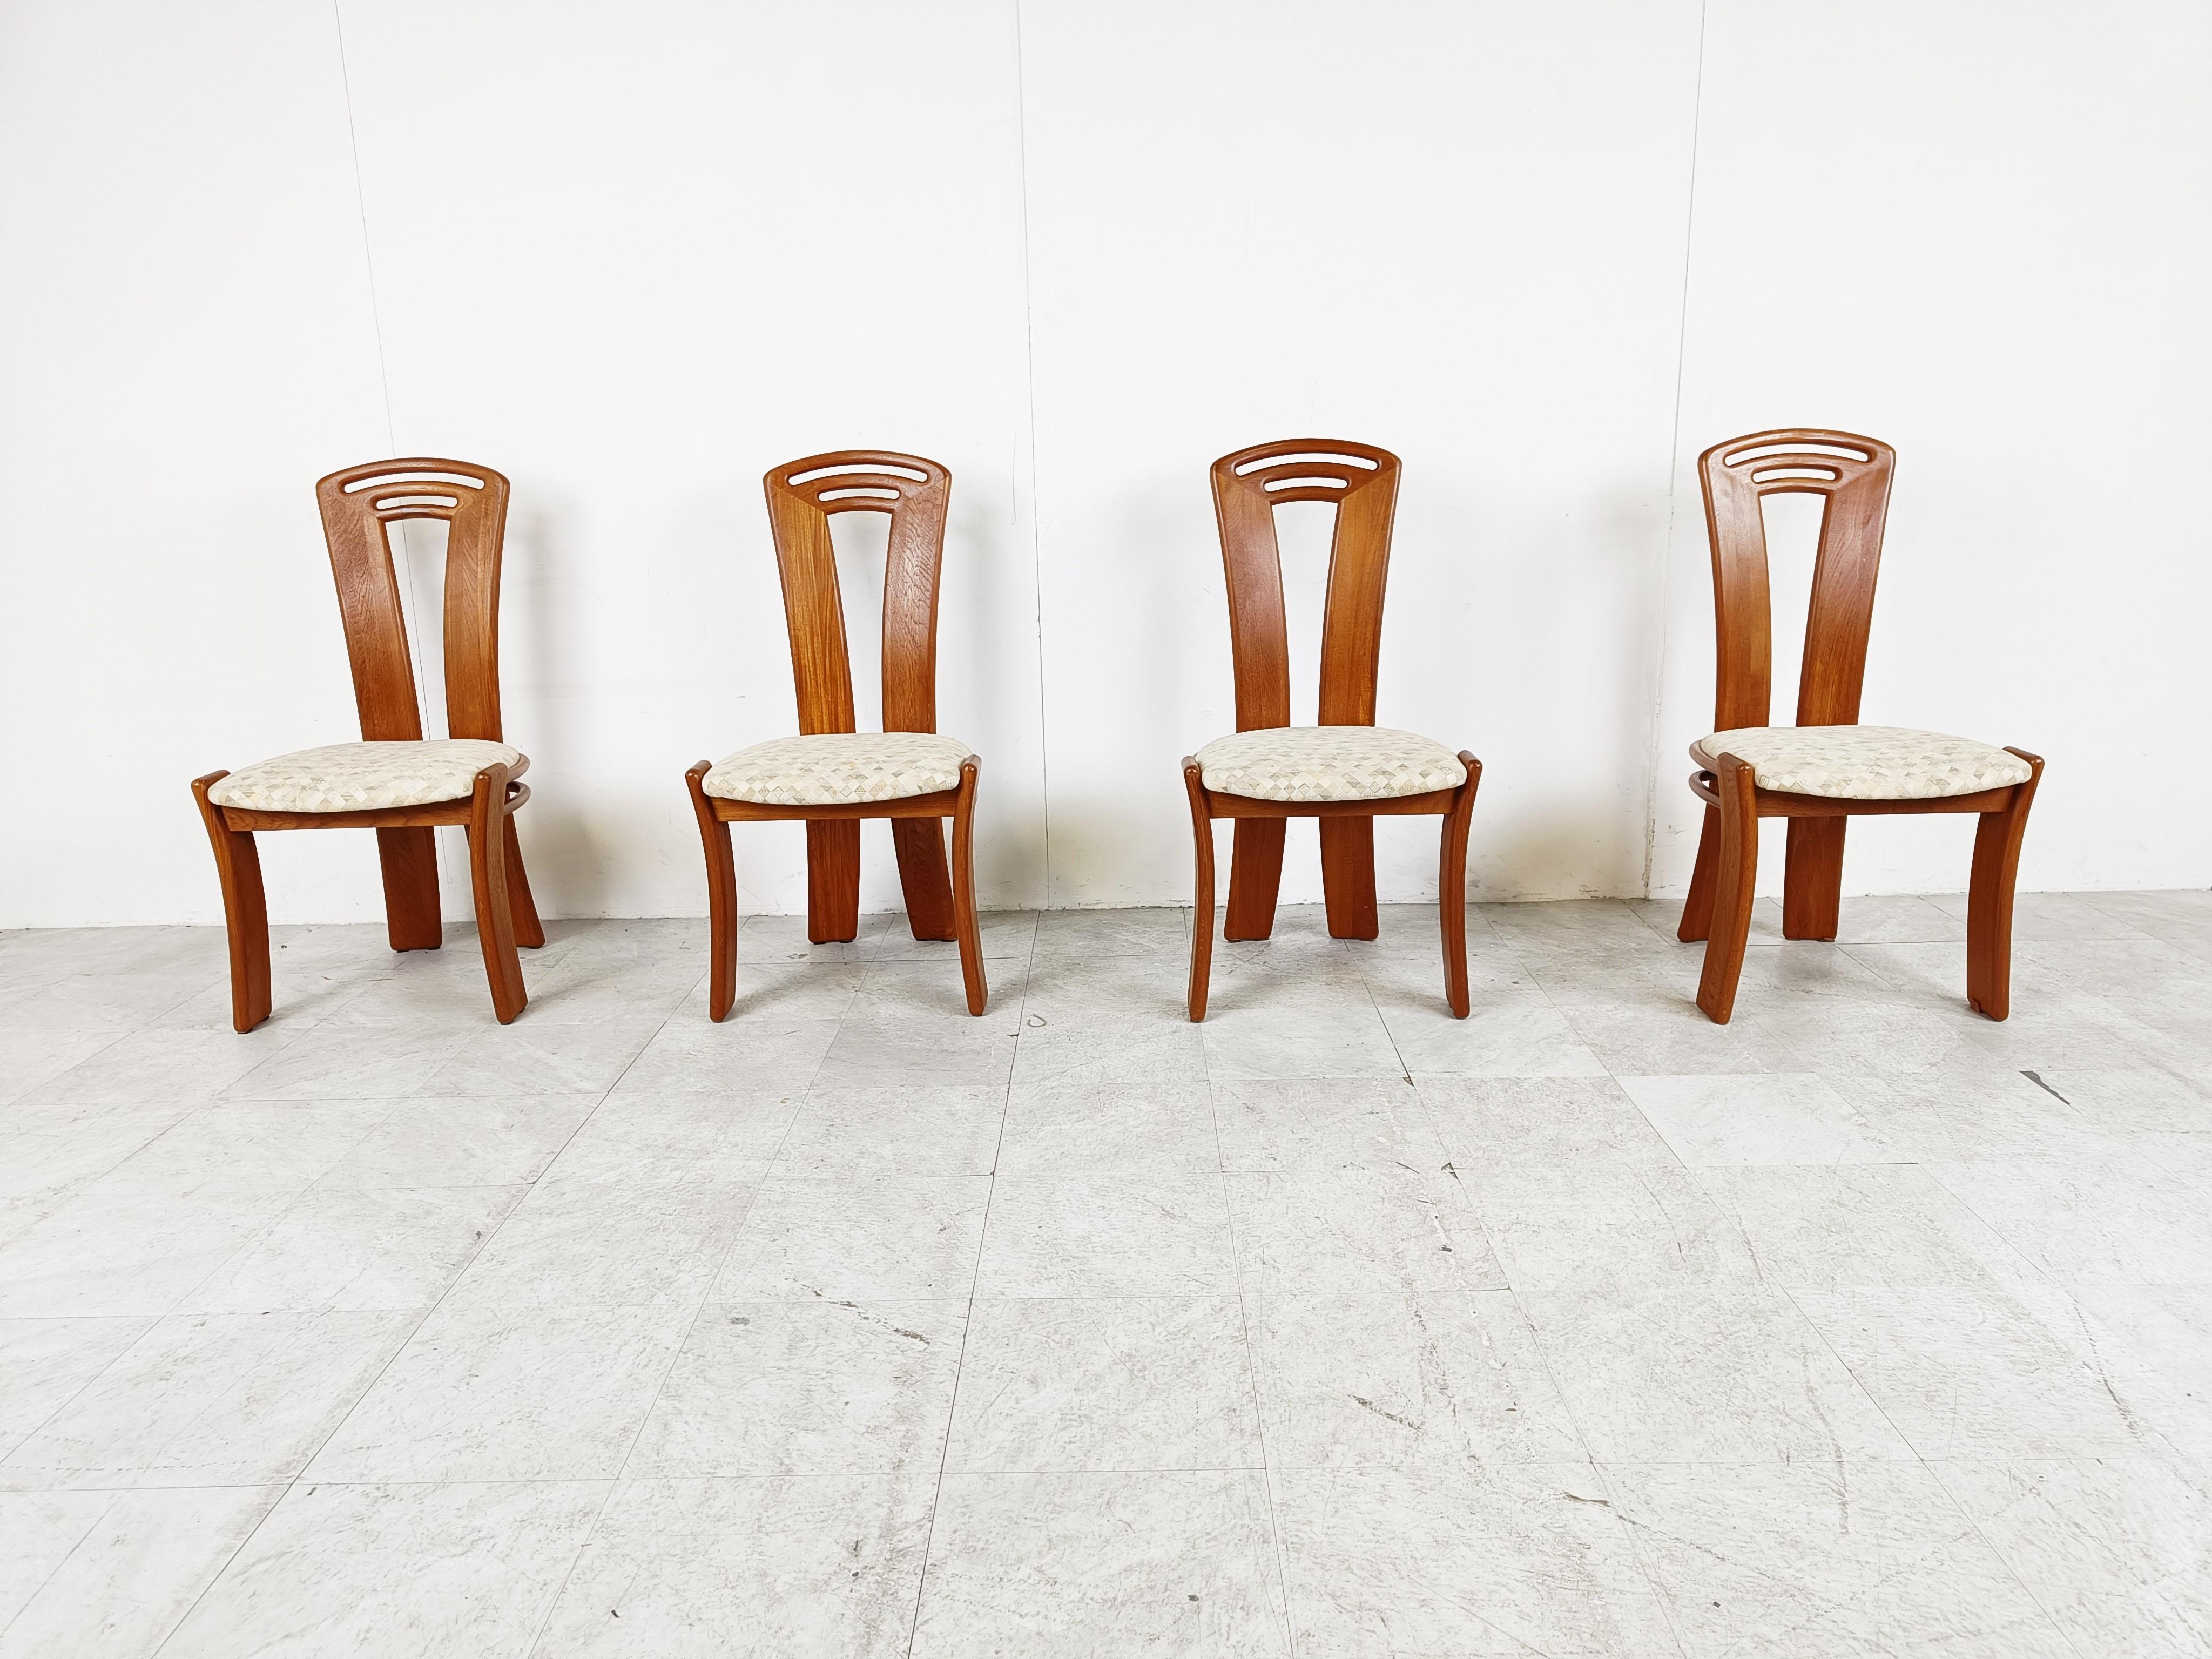 Danish Set of 4 Vintage Scandinavian Dining Chairs, 1960s For Sale